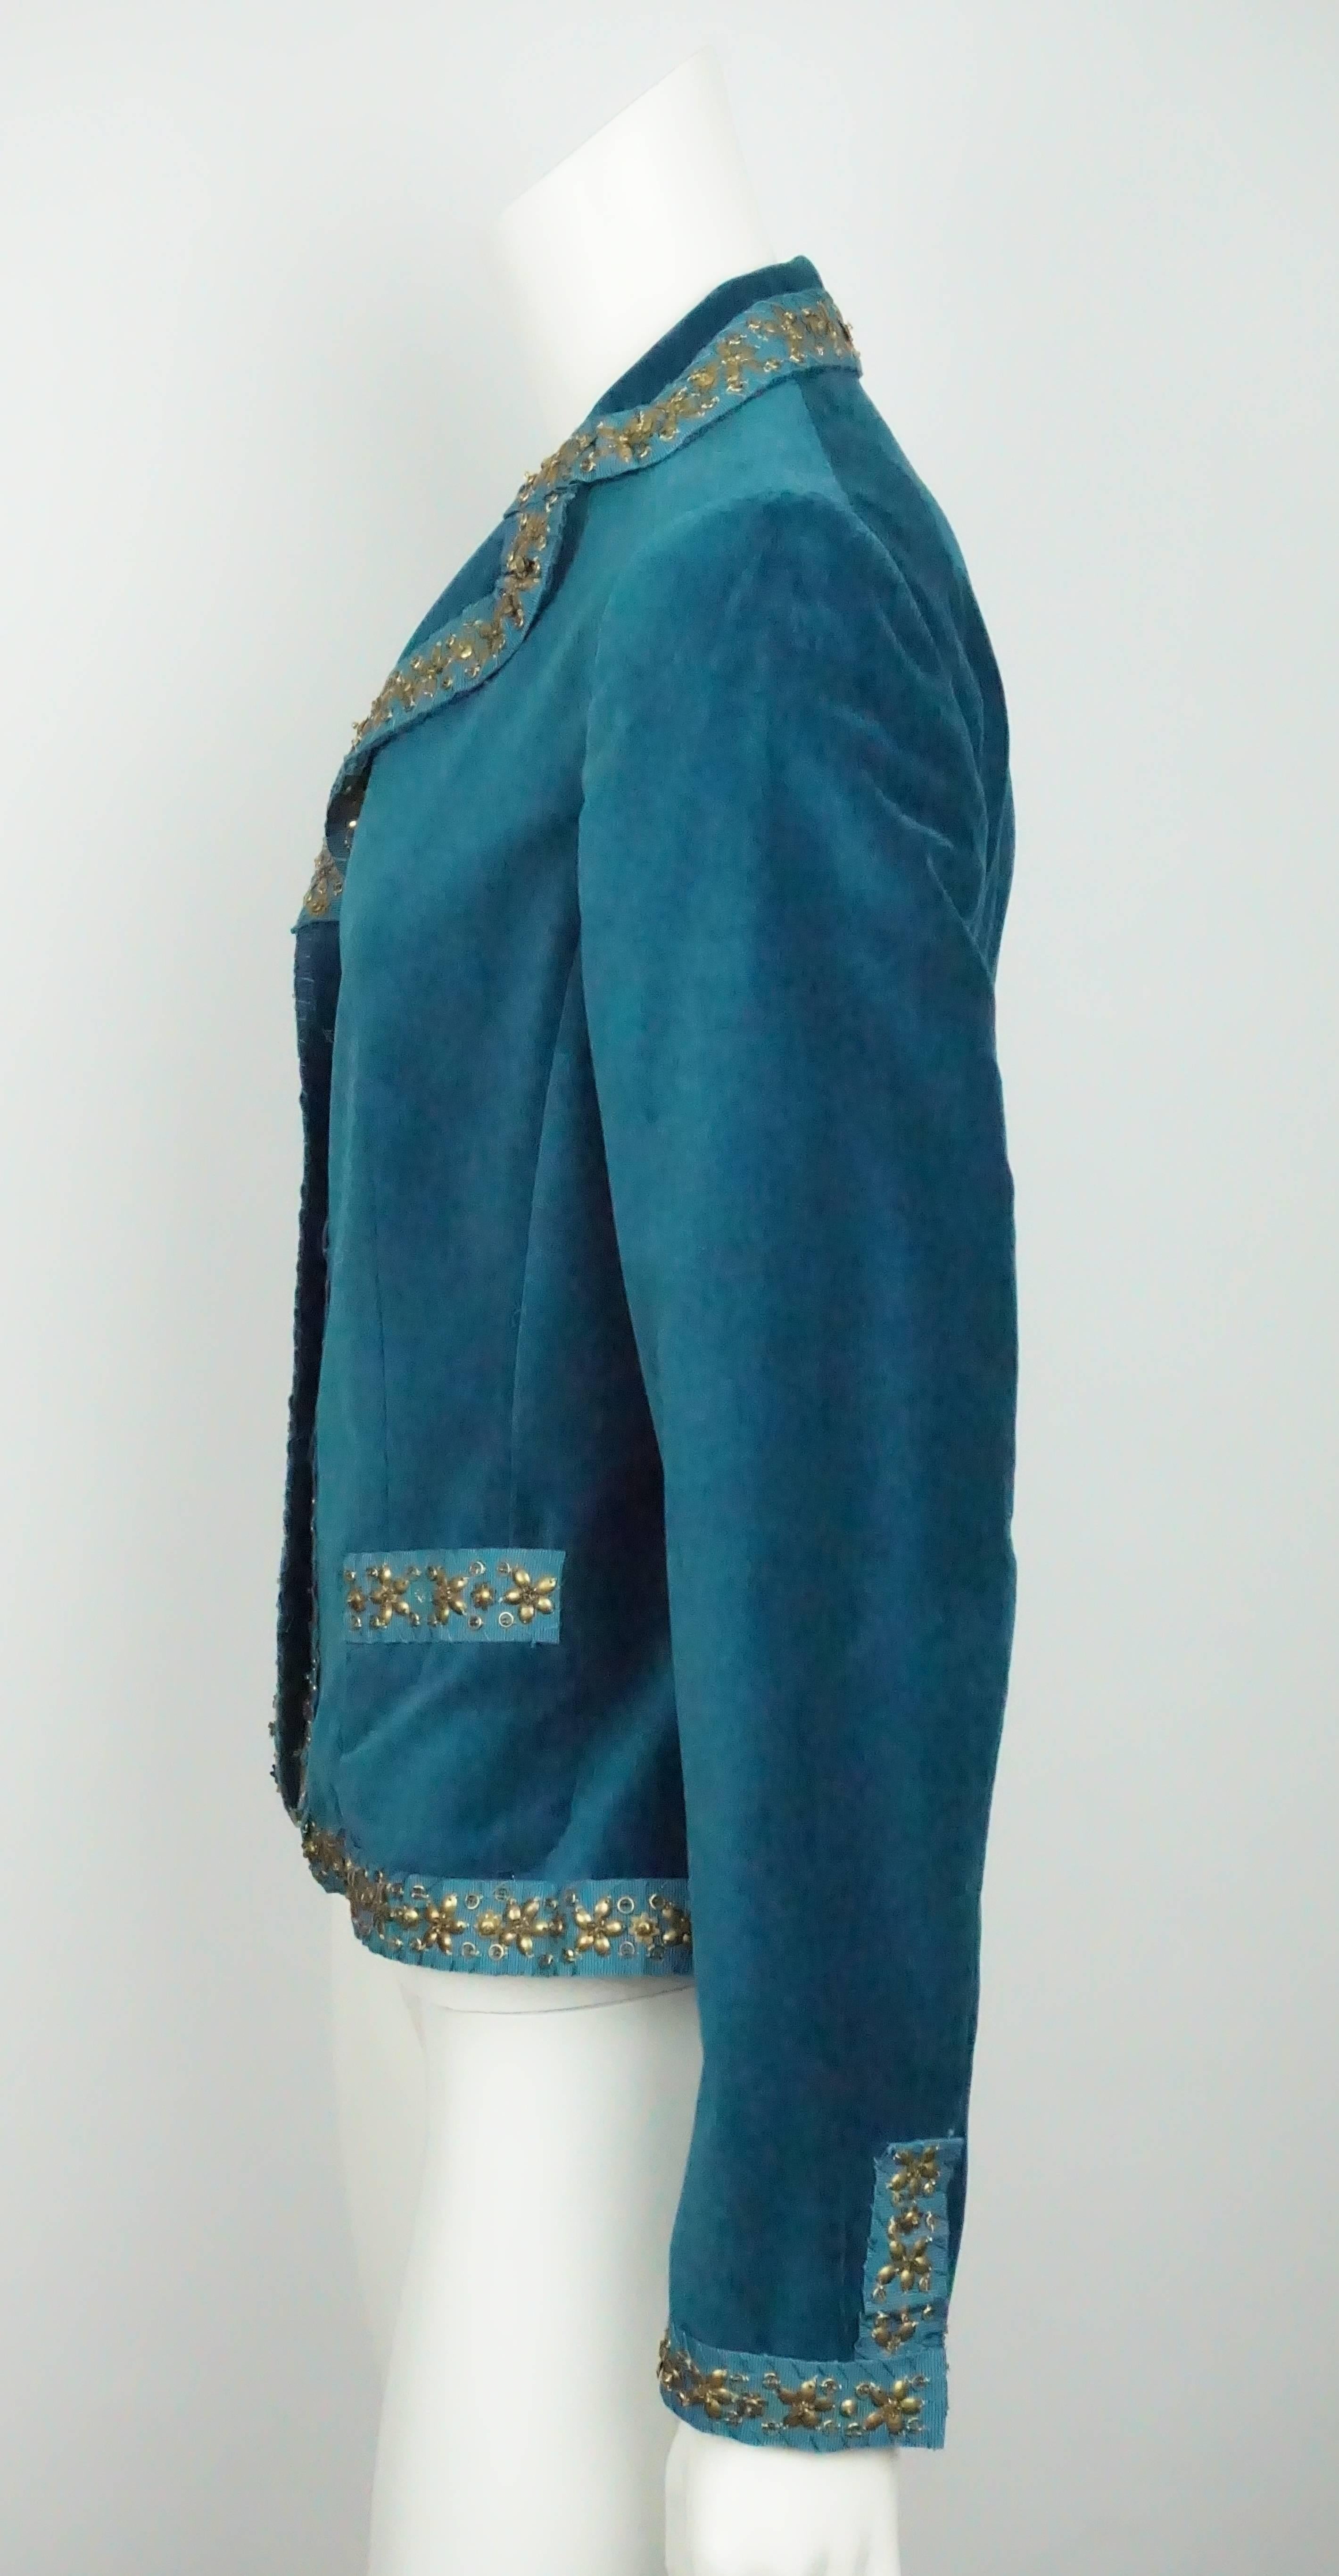 Moschino Teal Velvet w/ Gold Bead Trim Jacket - 8  This unique yet gorgeous jacket is in excellent condition. The jacket is made of a cotton blend velvet and is lined in silk. The trim around the jacket is 1.25